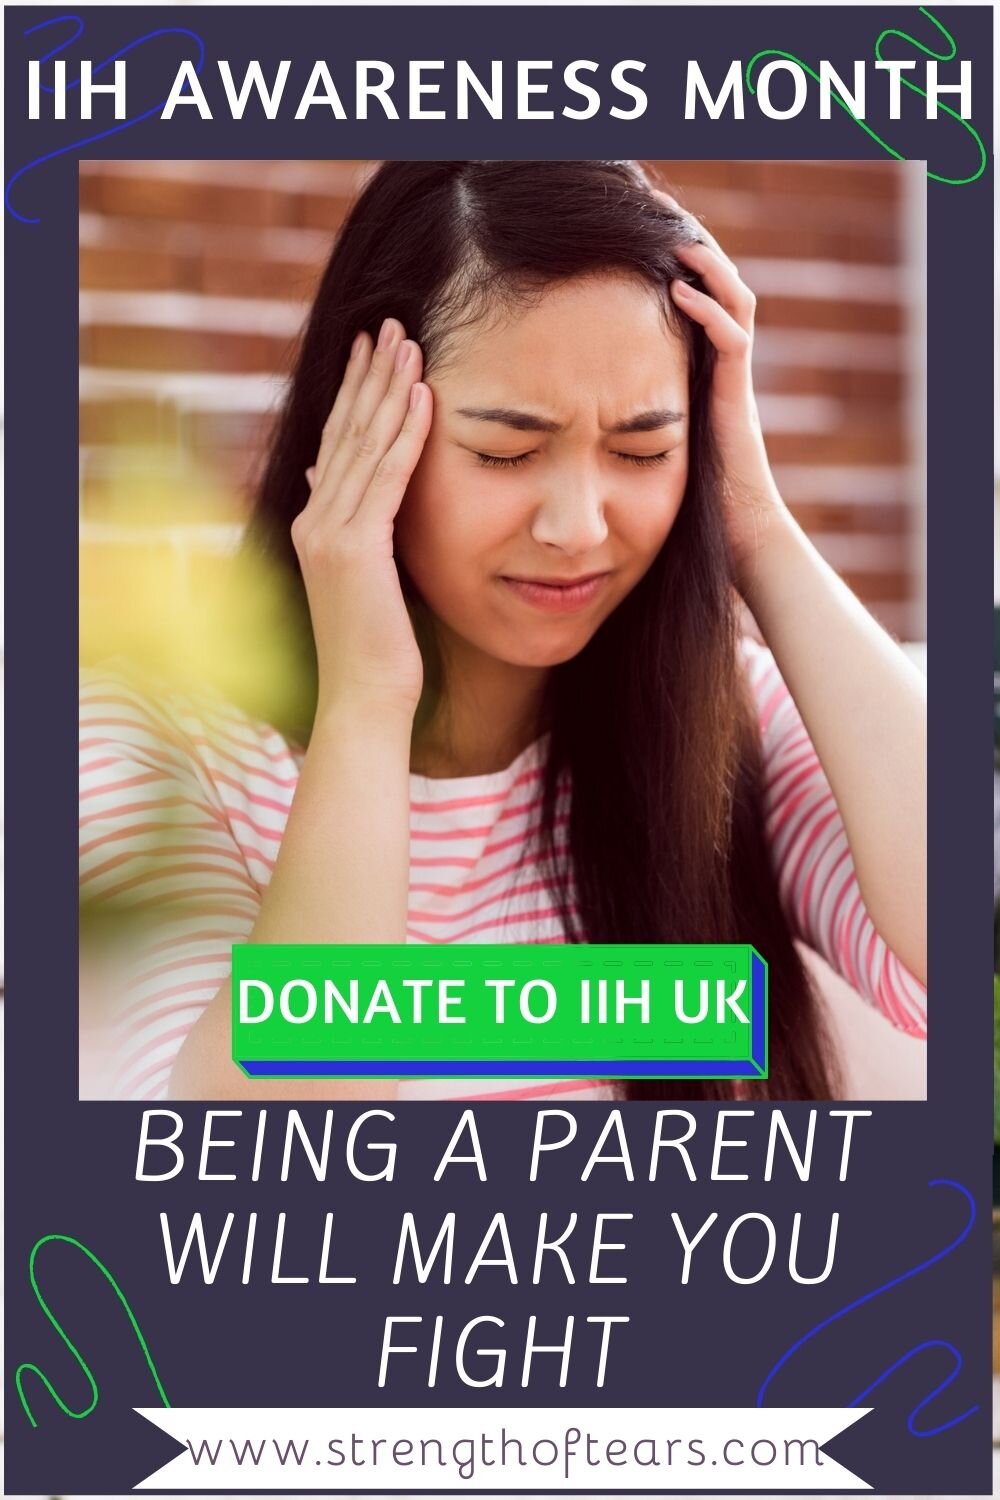 IIH Awareness Month: Being A Parent Will Make You Fight